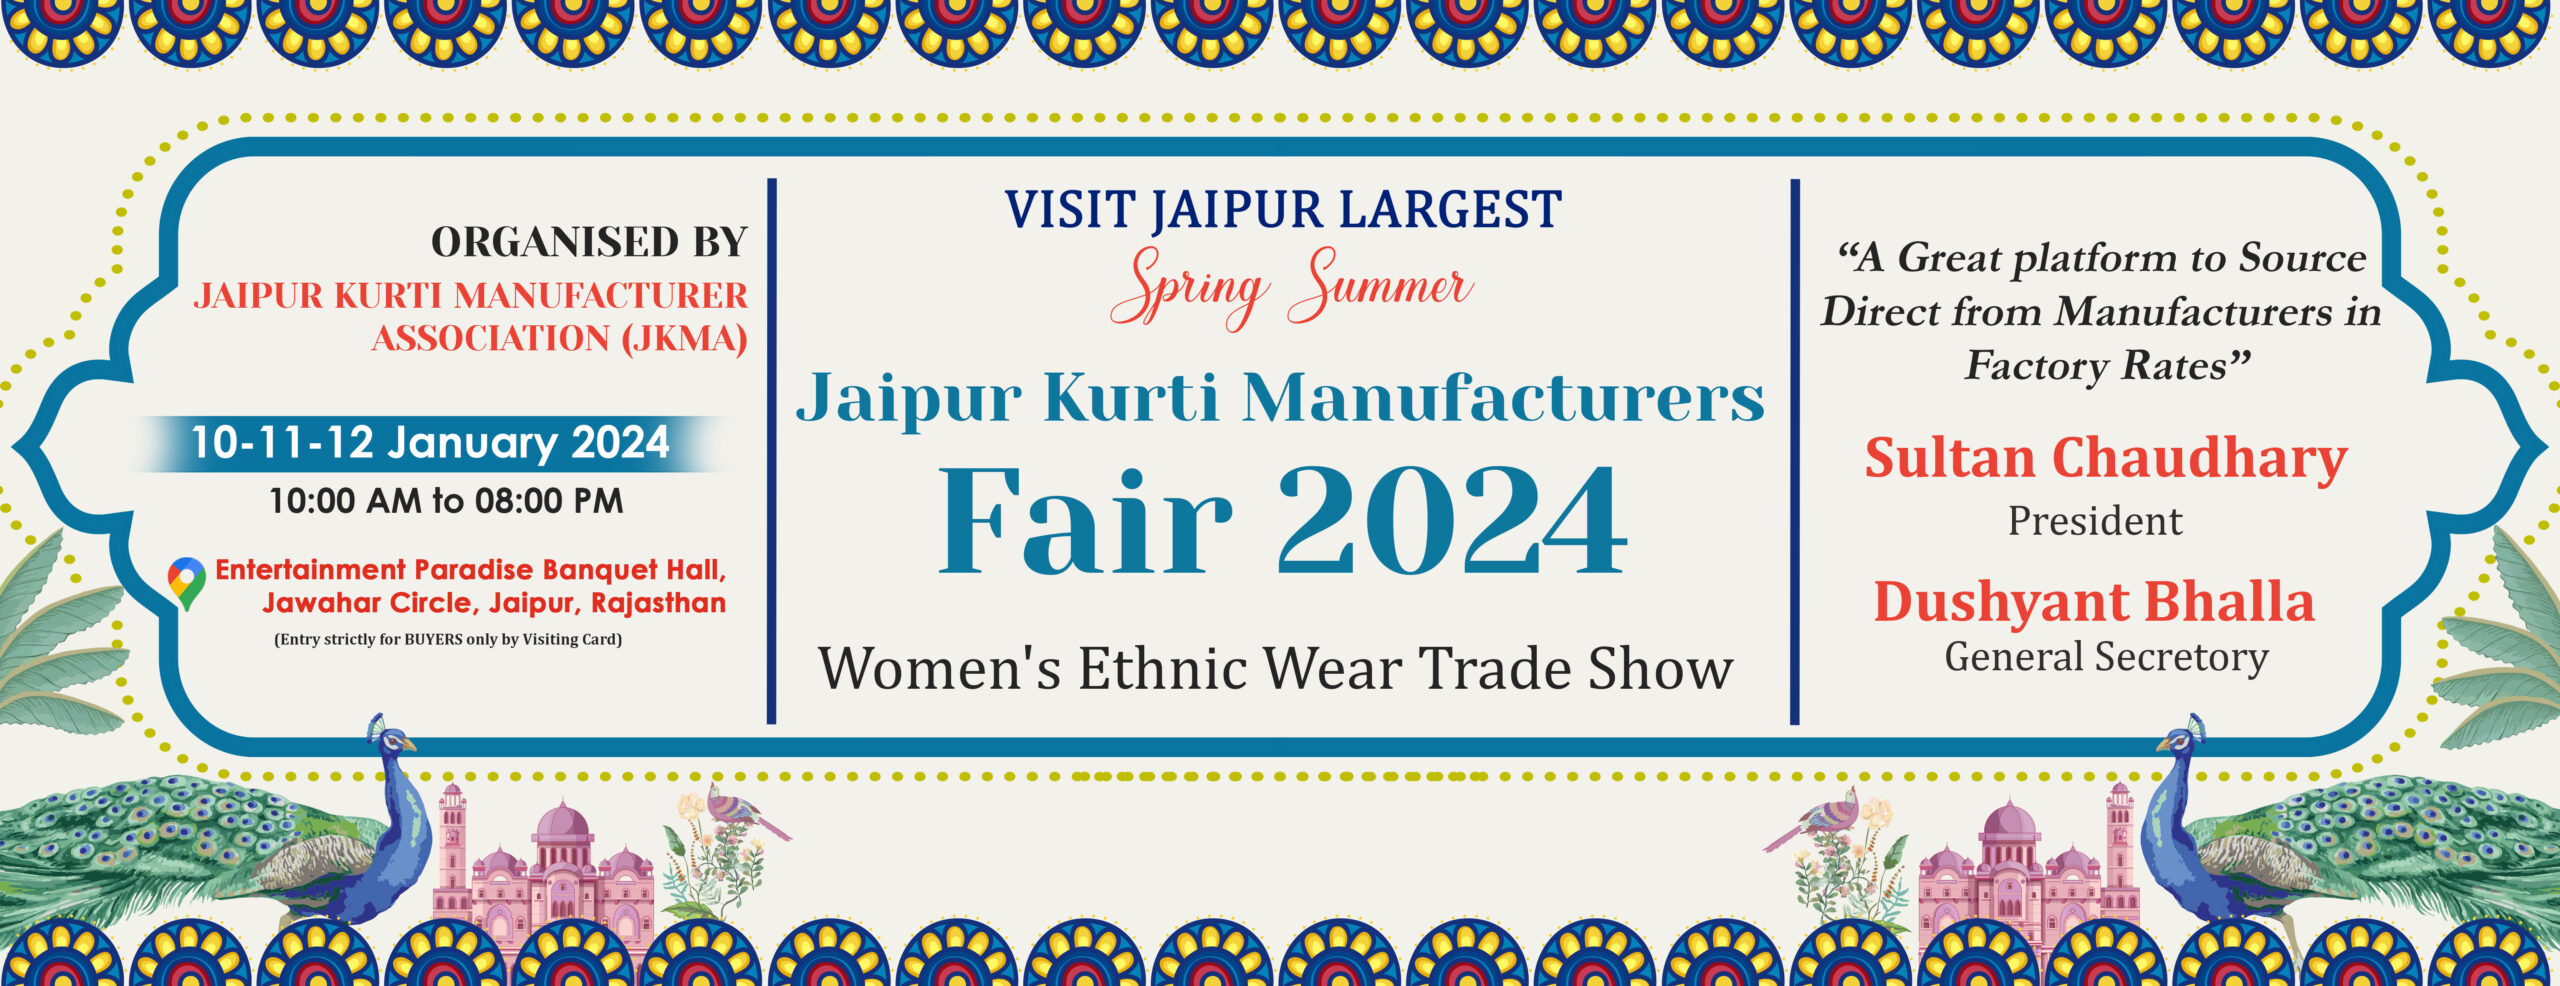 Jaipur Kurti Manufacturers Fair 2024 (Jaipur Garment Fair / JKMA Fair) ANNOUNCEMENT for Jaipur Kurti Manufacturers Fair 2024 by Jaipur Kurti Manufacturer Association in Jaipur ONLINE VISITORS #REGISTRATION IS NOW OPEN…! #REGISTER_ONLINE – SAVE RS 100 – AVOID LONG QUEUES AT REGISTRATION DESK Jaipur is the biggest of hub of manufacturing of Jaipuri Kurtis, Kurti Pant Sets, Kurti Dupatta Sets, Anarkalis, Anarkali Pant Dupatta Sets in Cotton, Rayon, Muslin, Silk, Modal, Chanderi, Handloom etc in variety of styles and patterns, Jaipur is supplying to all the Wholesale Markets, Retailers, Brands, Ecommerce Companies etc. Here is the chance to meet Direct Manufacturer of Kurtis having their own manufacturing units and factories in Sitapura Industrial Area, Mansarovar Industrial Area, Sanganer and other locations of Jaipur Rajasthan. Don’t Miss it…! Jaipur Kurti Manufacturer Association is organizing Jaipur Kurti Fair 2023 which is Jaipur’s Largest Spring / Summer Apparel Trade Expo in which all Wholesalers, Traders, Retailers, Brands, Ecommerce Companies, Garment Textile Agents are going to visit. Date: 10-11-12 January 2023 (3 Days) Venue: Entertainment Paradise Banquet Hall, Jaipur, Rajasthan Google Location of Venue: https://goo.gl/maps/F5jF63KyWR2Y7j5Z9 (Remember … Every Year – January – Jaipur Kurti Fair by Jaipur Kurti Manufacturer Association – Summer Booking – To Order Jaipuri Kurtis in Premium Cotton Prints from Direct Manufacturers) >>> Only Jaipur >>> Only Jaipur >>> Only Jaipur √ Share on your Social Media Accounts. √ Share on your WhatsApp Status √ Save in your Calendar √ Inform your contacts in your Network #kurti_fair_in_jaipur #kurti_expo_in_jaipur #kurti_tradeshow_in_jaipur #jaipurkurtimanufacturer #jaipurkurtiwholesale #cmai #springfair #summerfair #kurtiexpo #kurtifair #jaipur_kurti_fair_2023 #jkma_jaipur #kurti_fair_in_janauary_for_summer_booking #chennai_apparel_association #garmentfair #mumbaigarmentfair